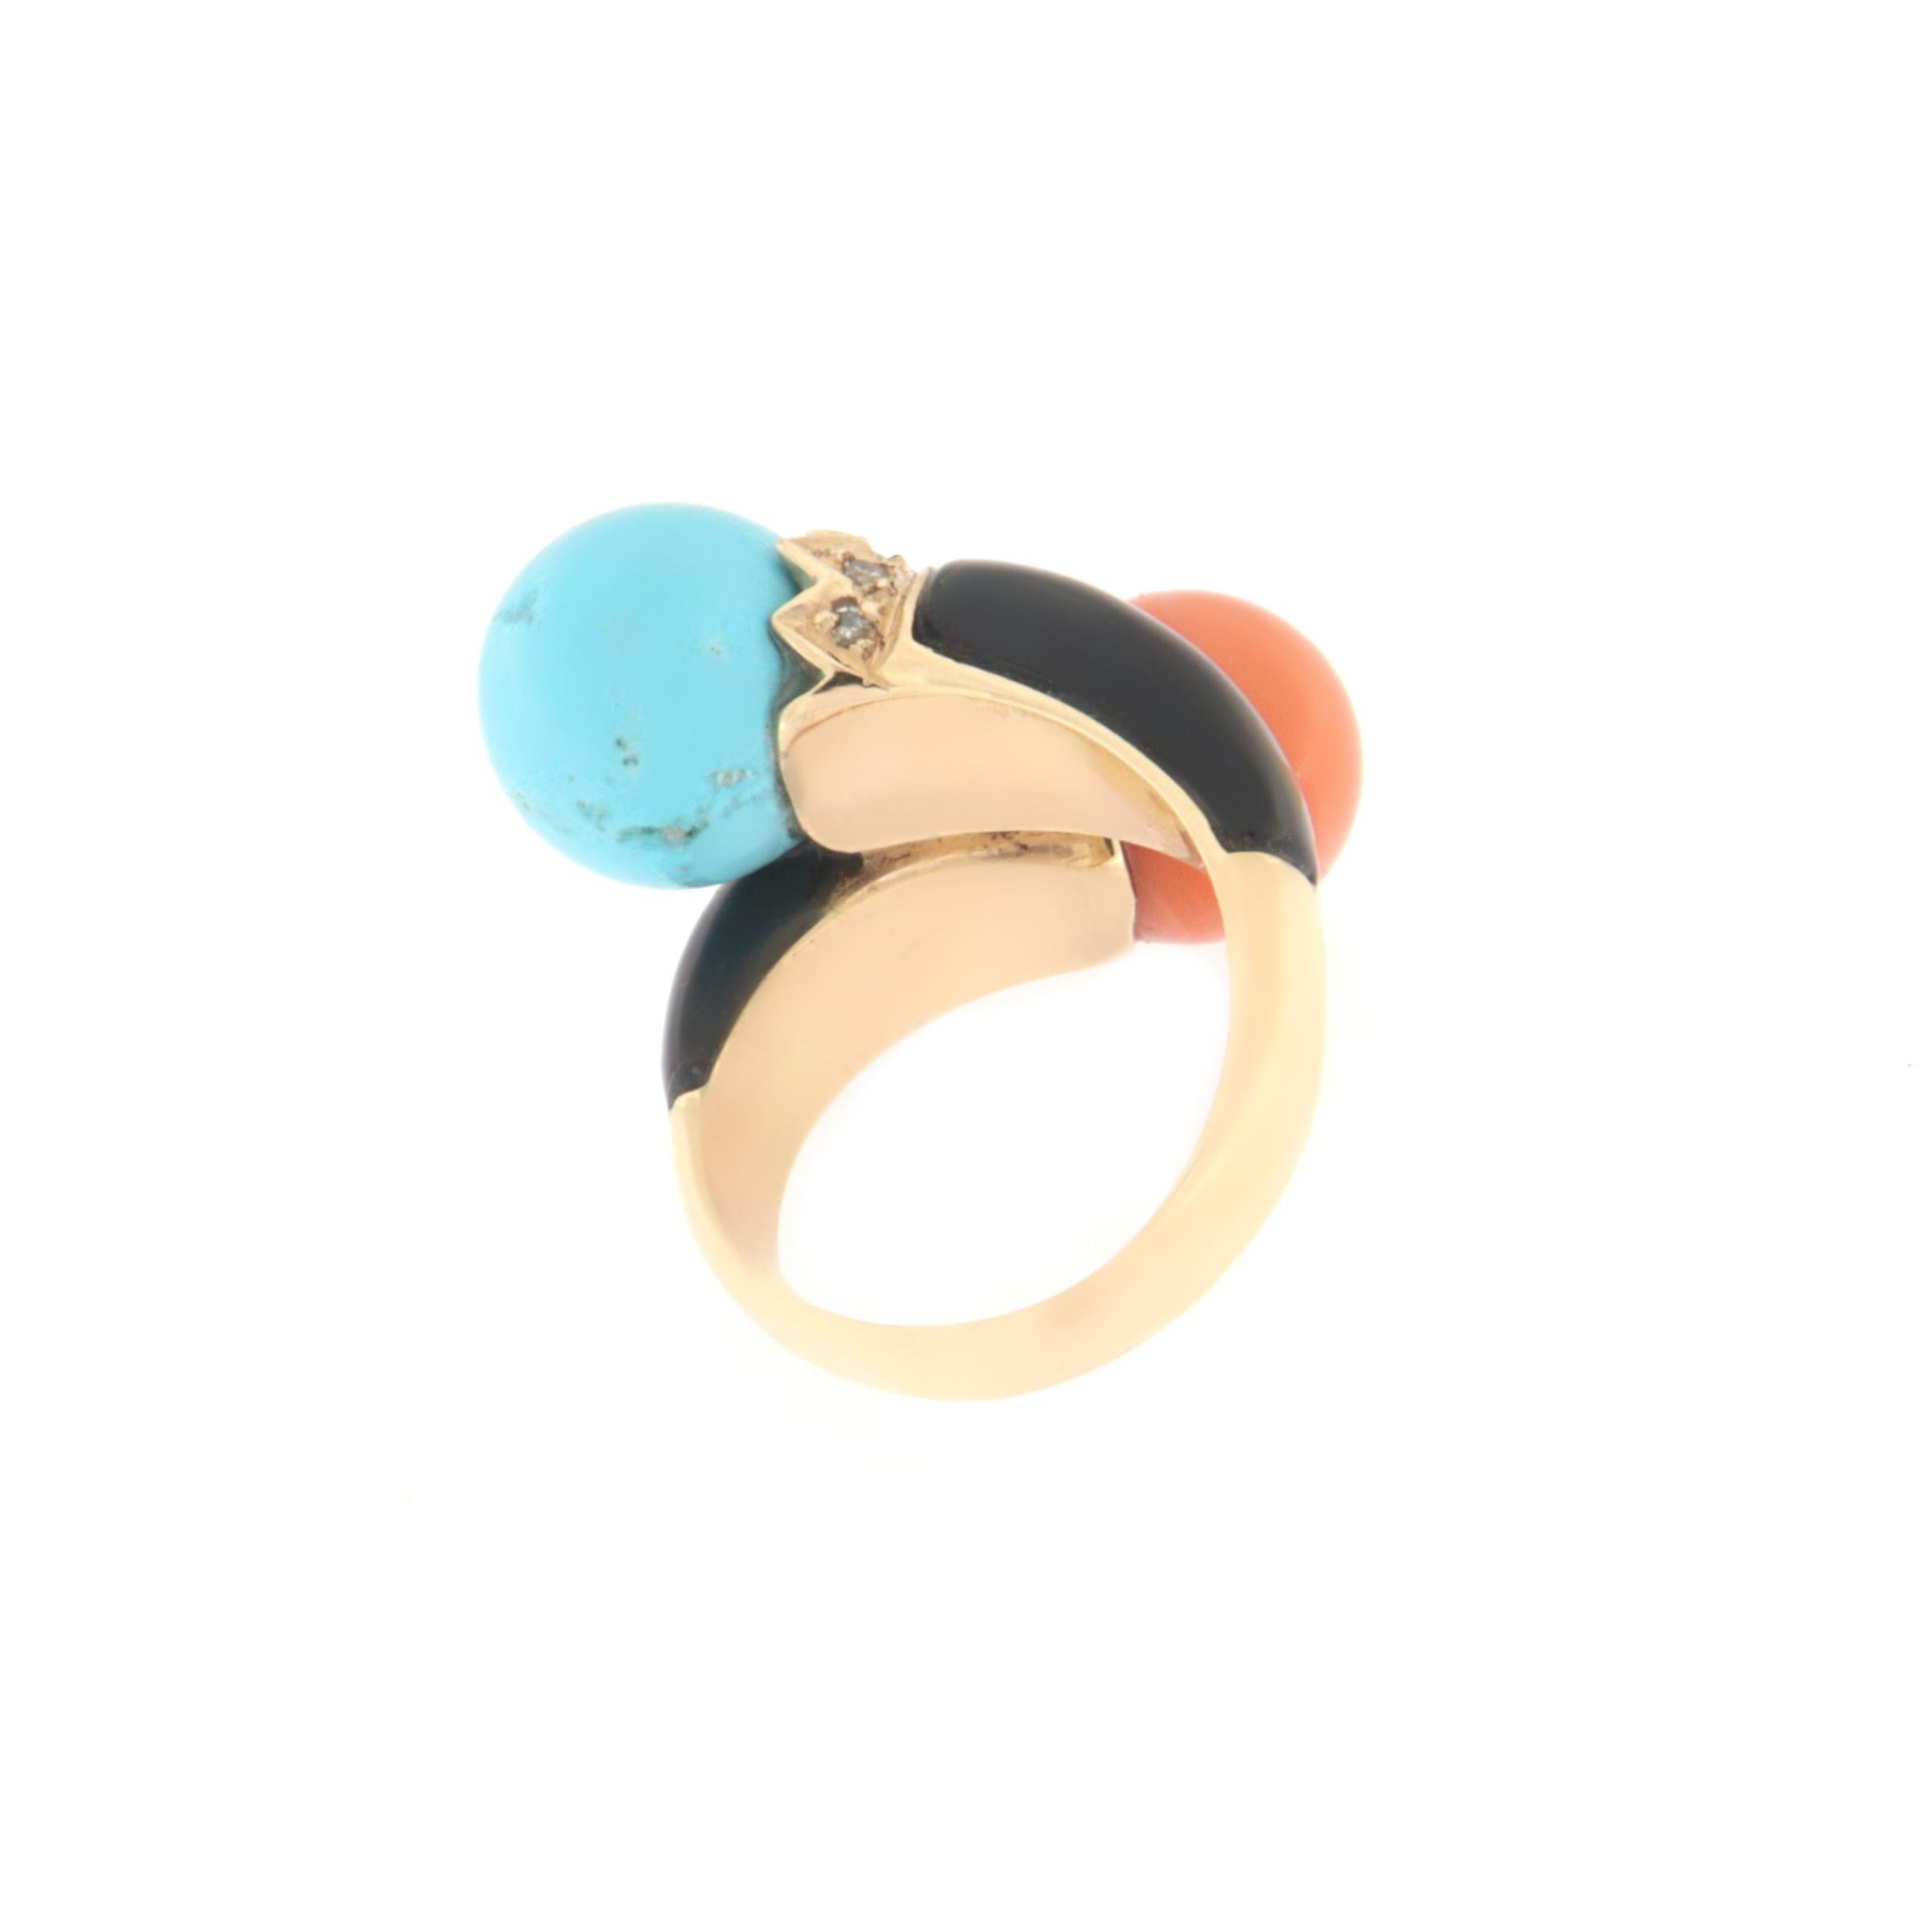 Brilliant Cut Coral Turquoise Onyx Diamonds 14 Karat Yellow Gold Cocktail Ring